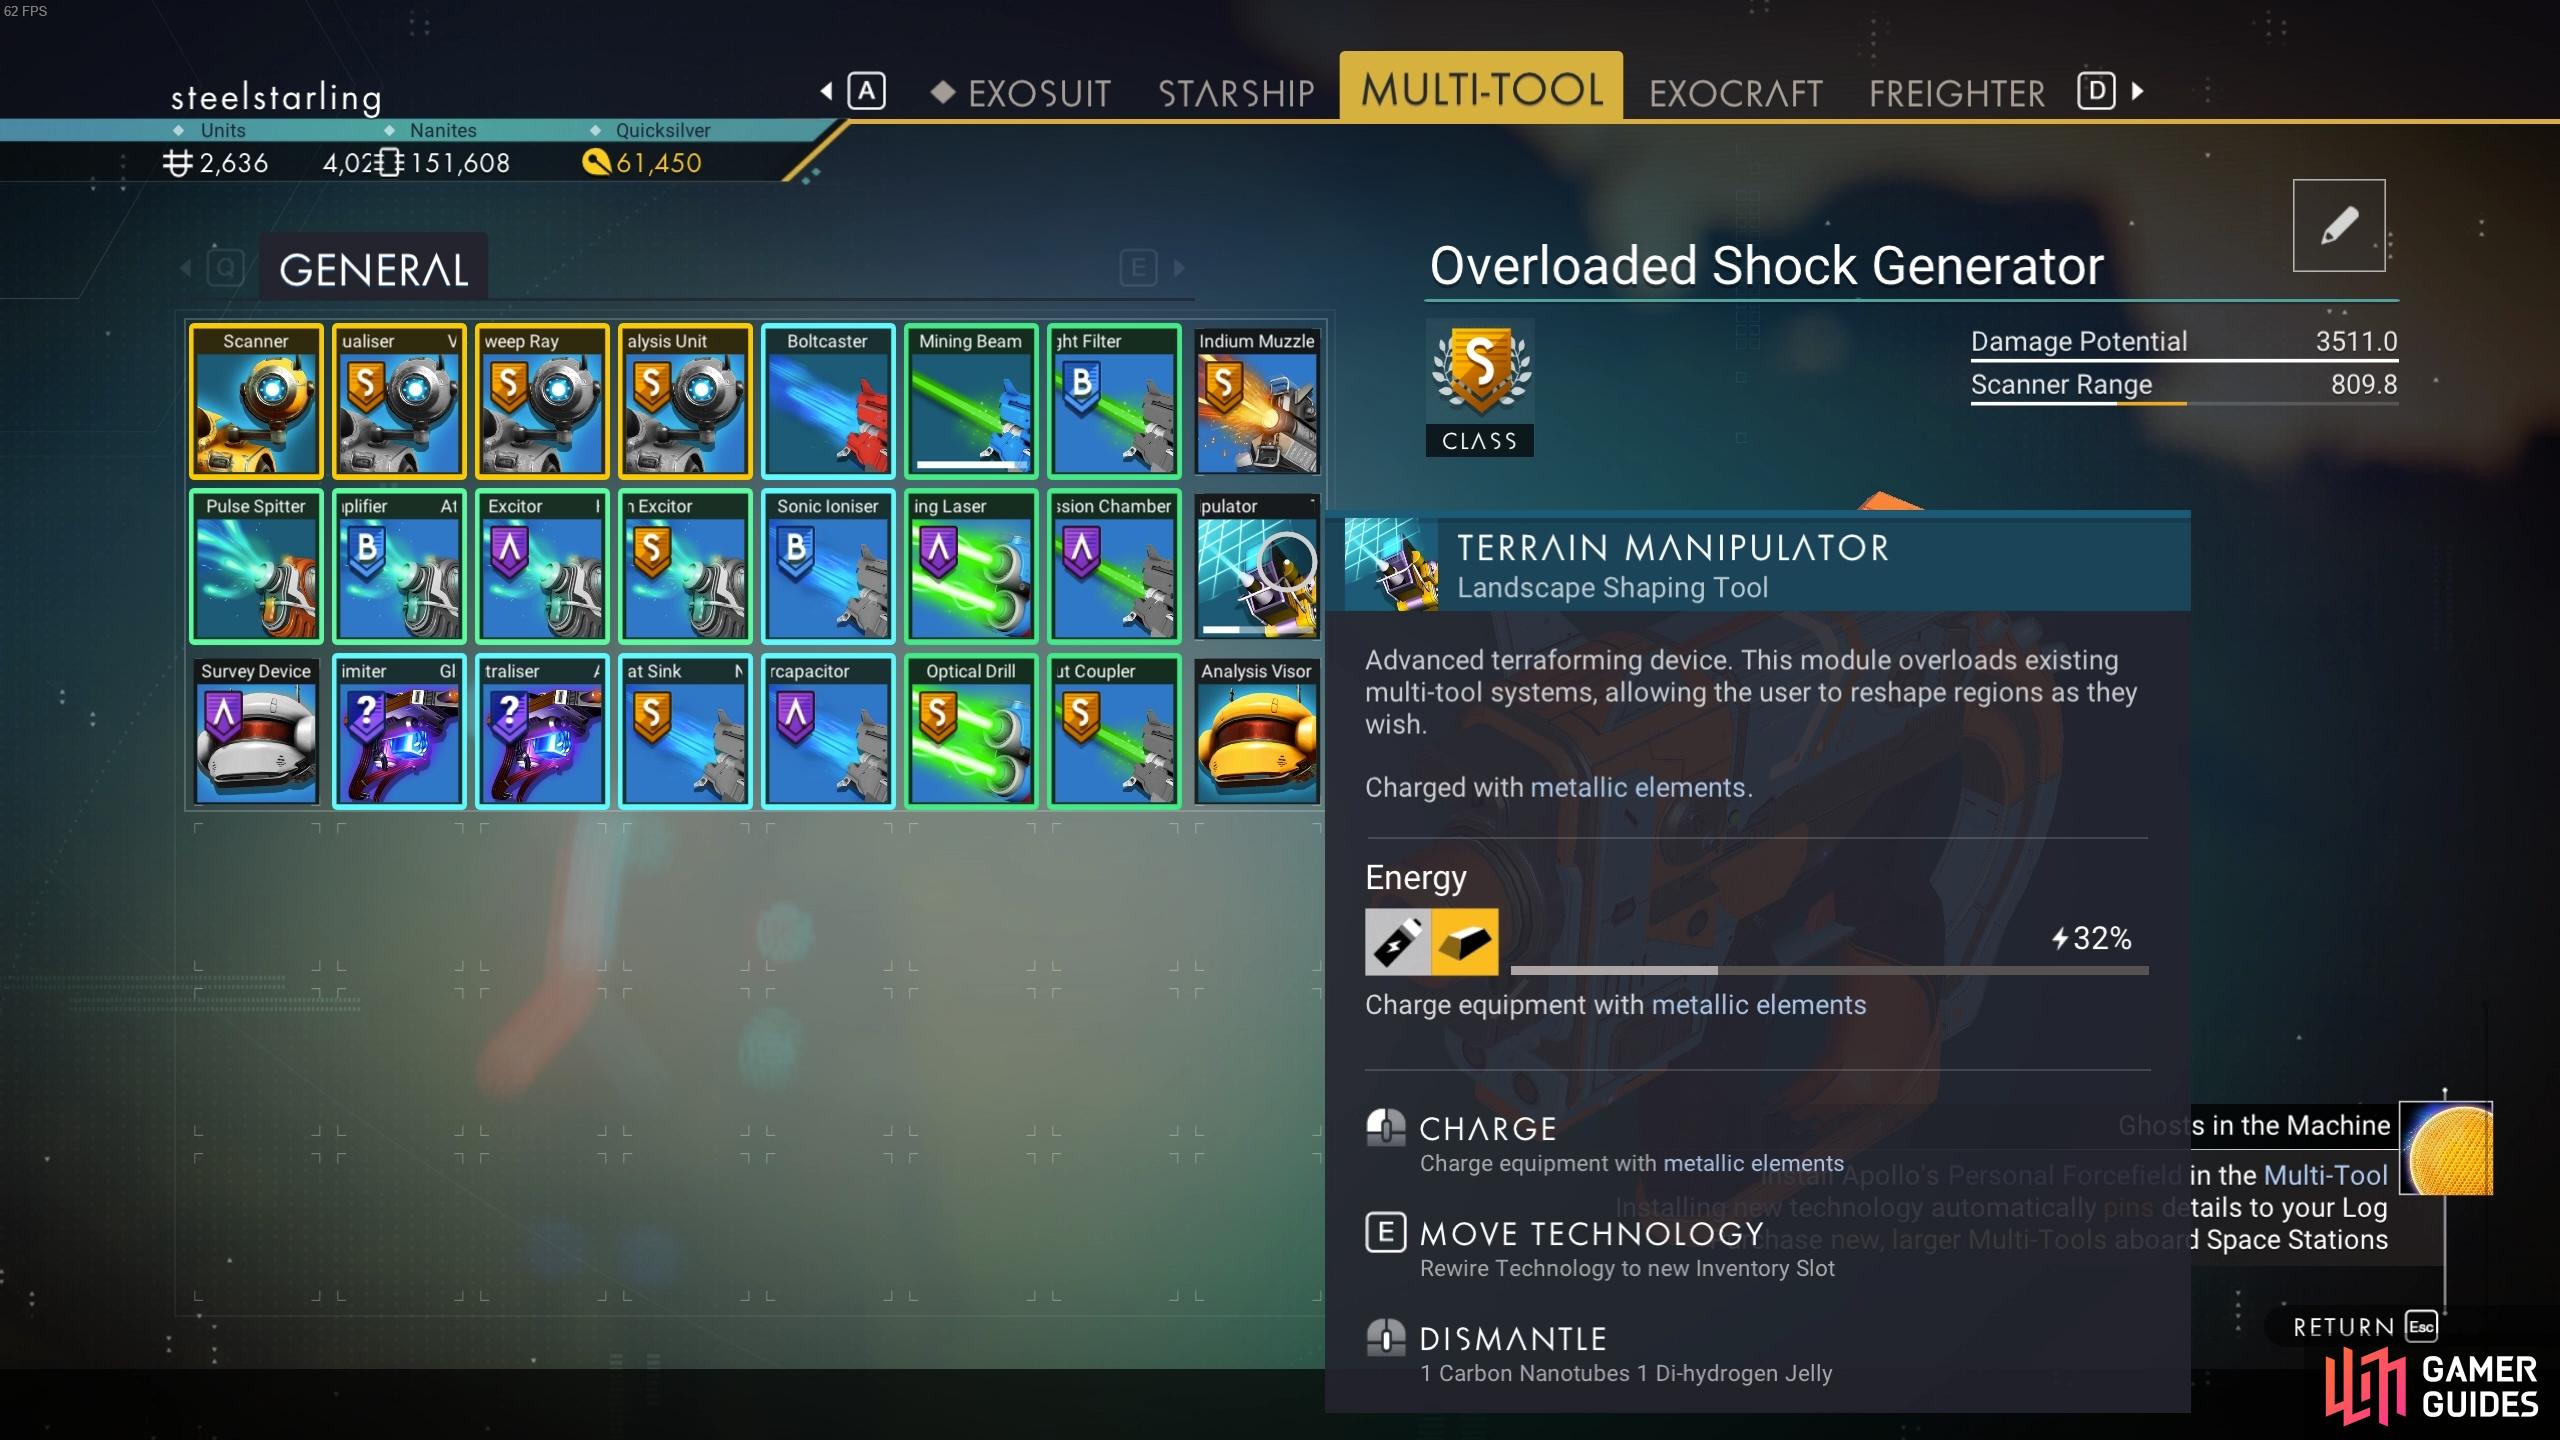 You can craft the Terrain Manipulator from the Multi-Tool inventory.